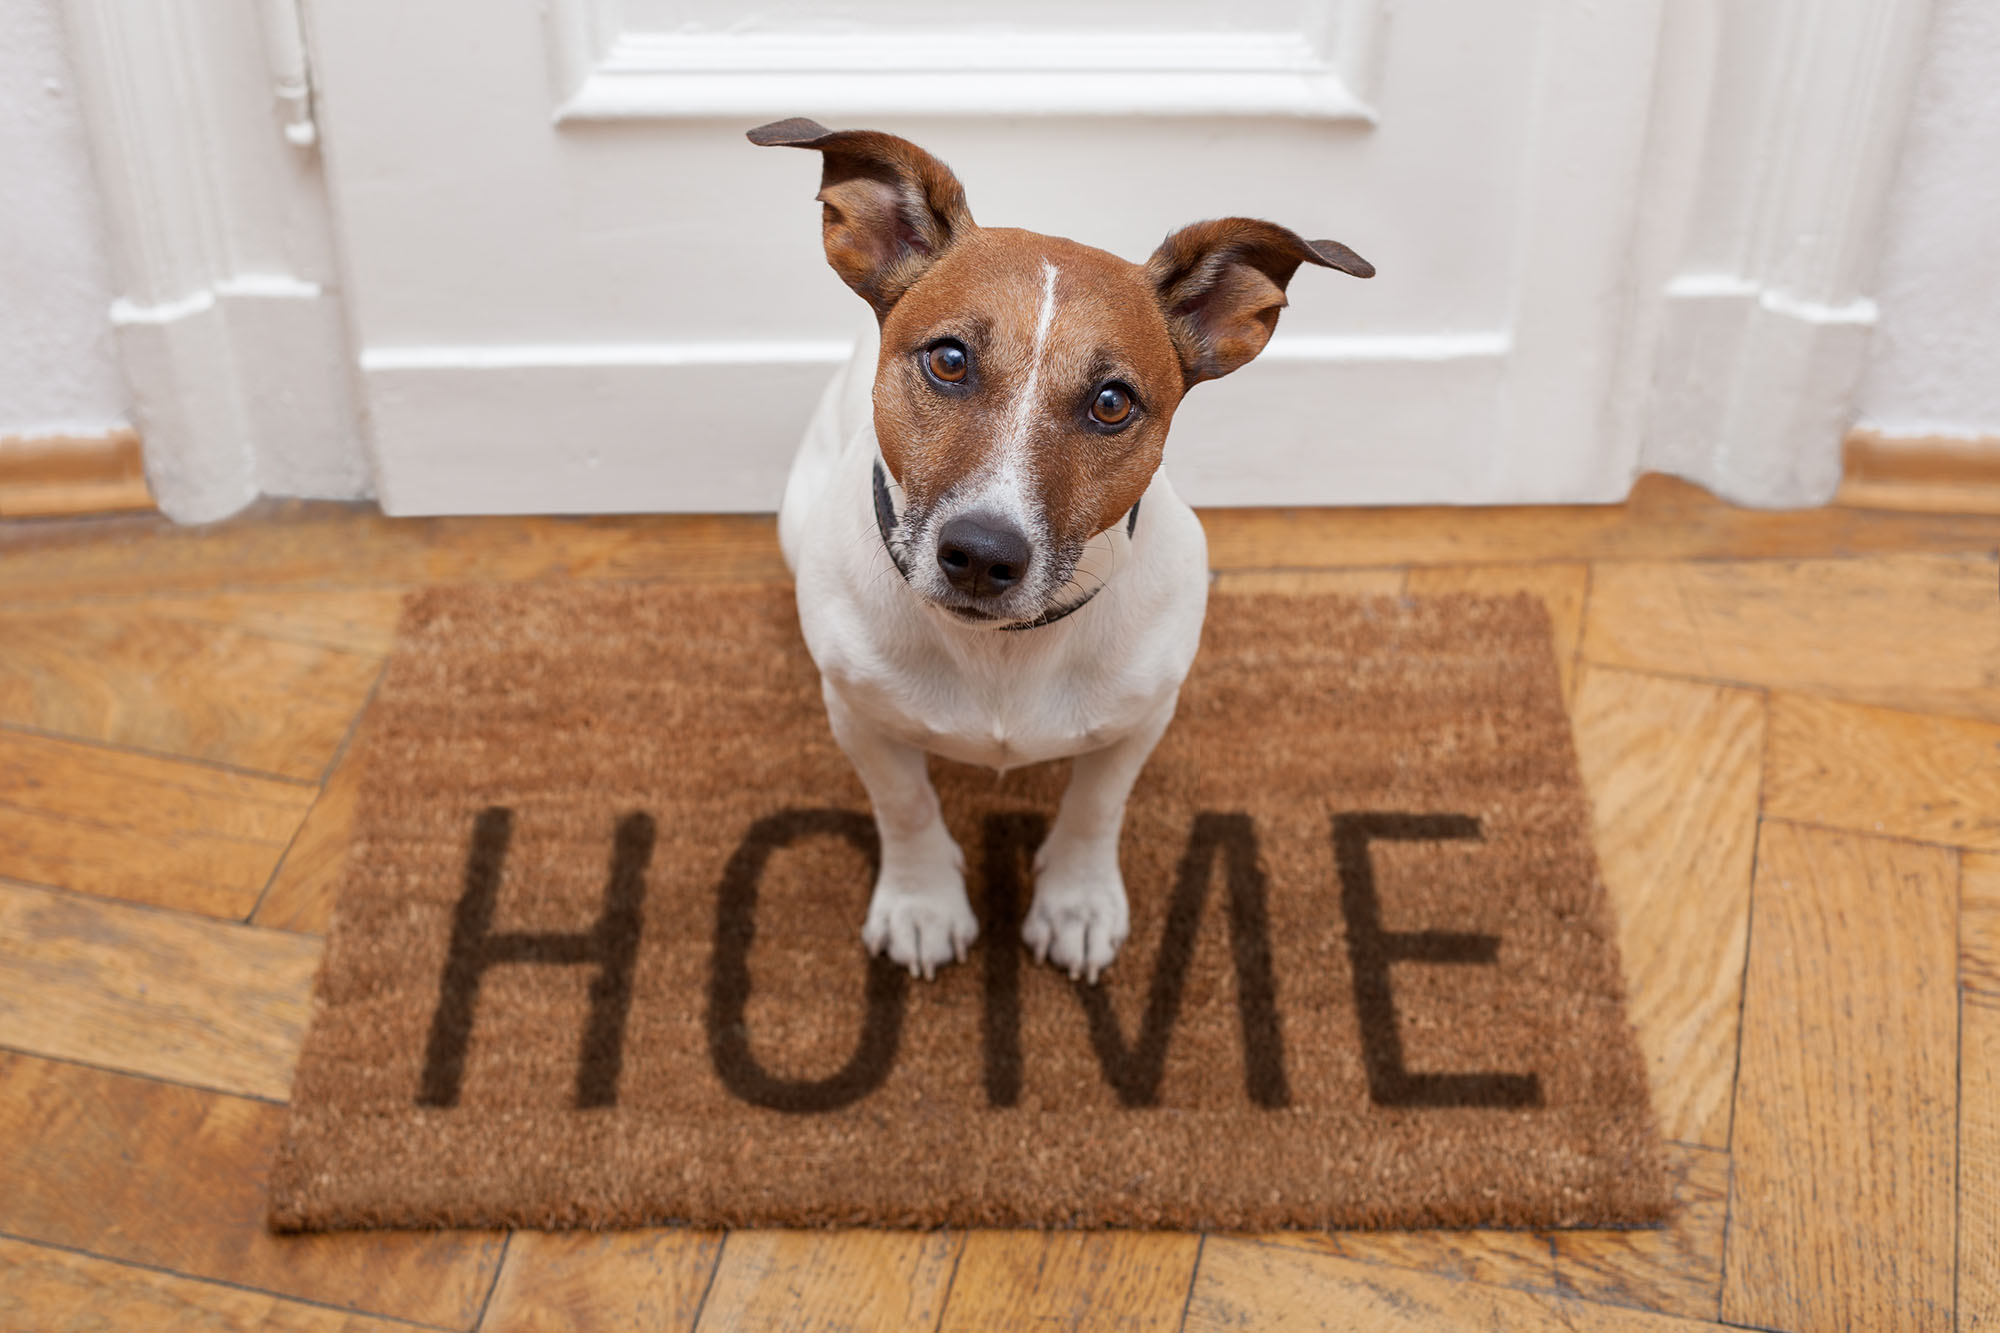 Cleaning pet stains from items in your home